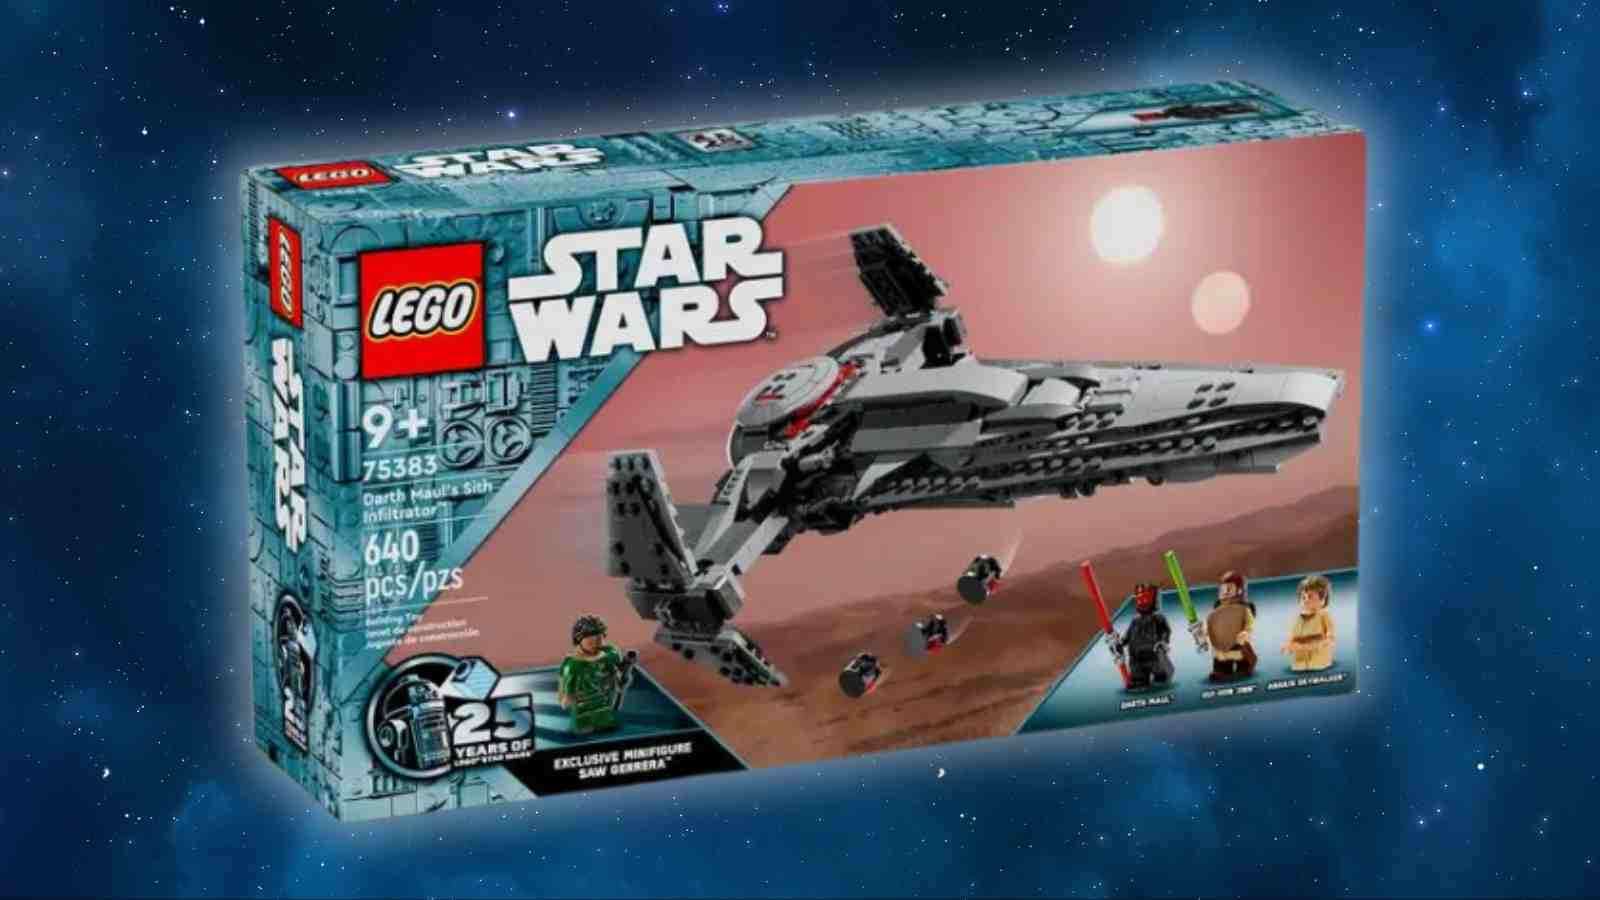 The LEGO-reimagined Darth Maul’s Sith Infiltrator on a galaxy background